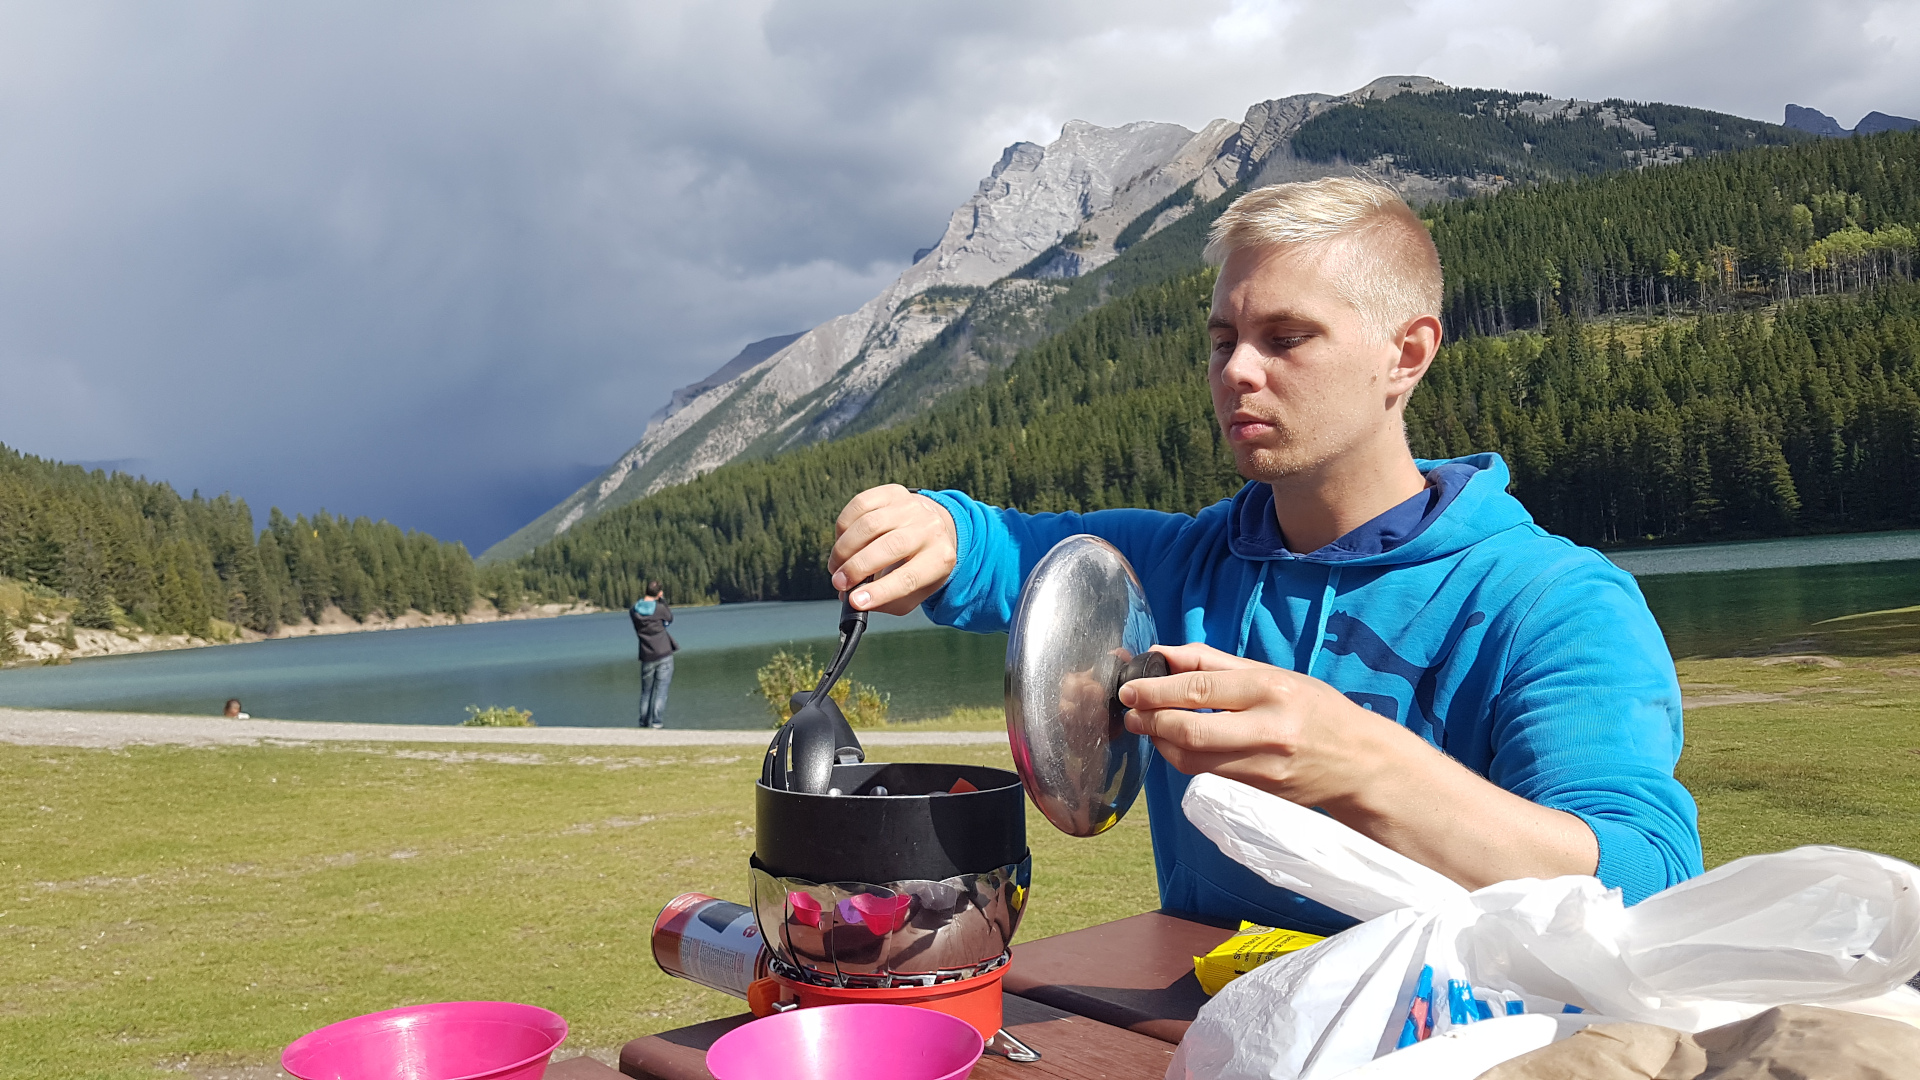 Cooking at a rest place of Minnewanka lake. Banff national park, Alberta, Canada.